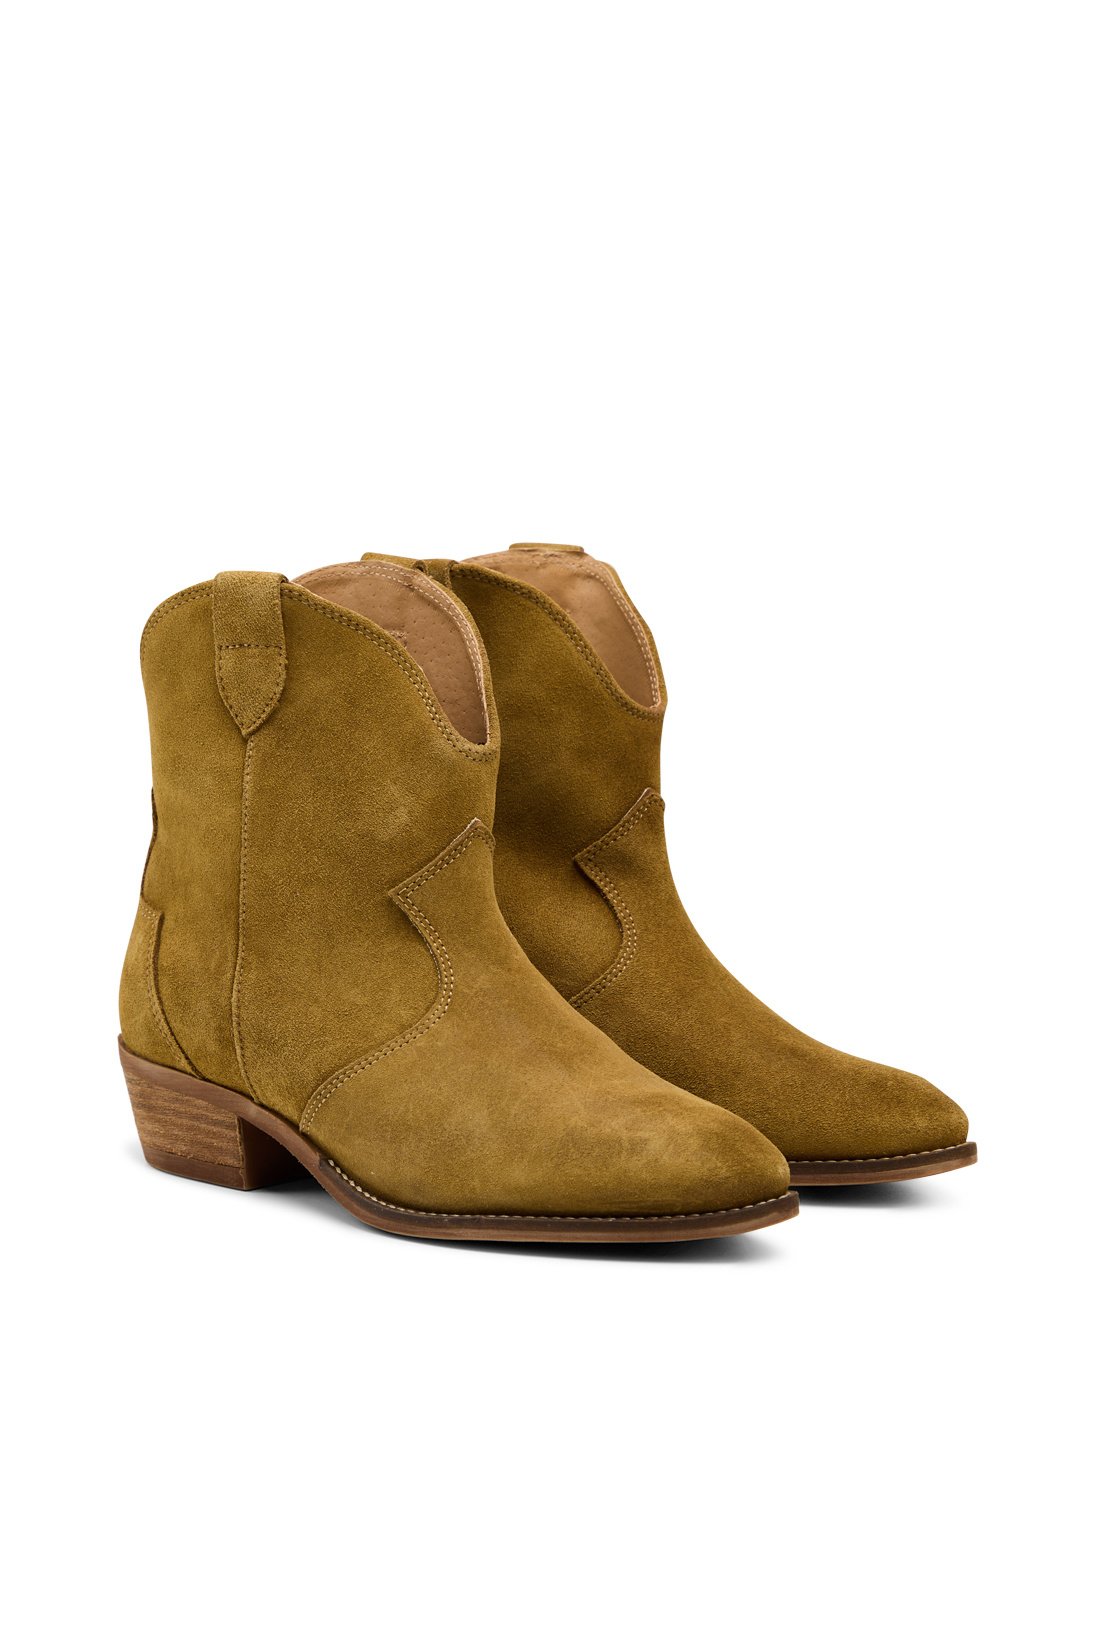 Pavement Clarice Leather Boot - Khaki Suede - RUM Amsterdam